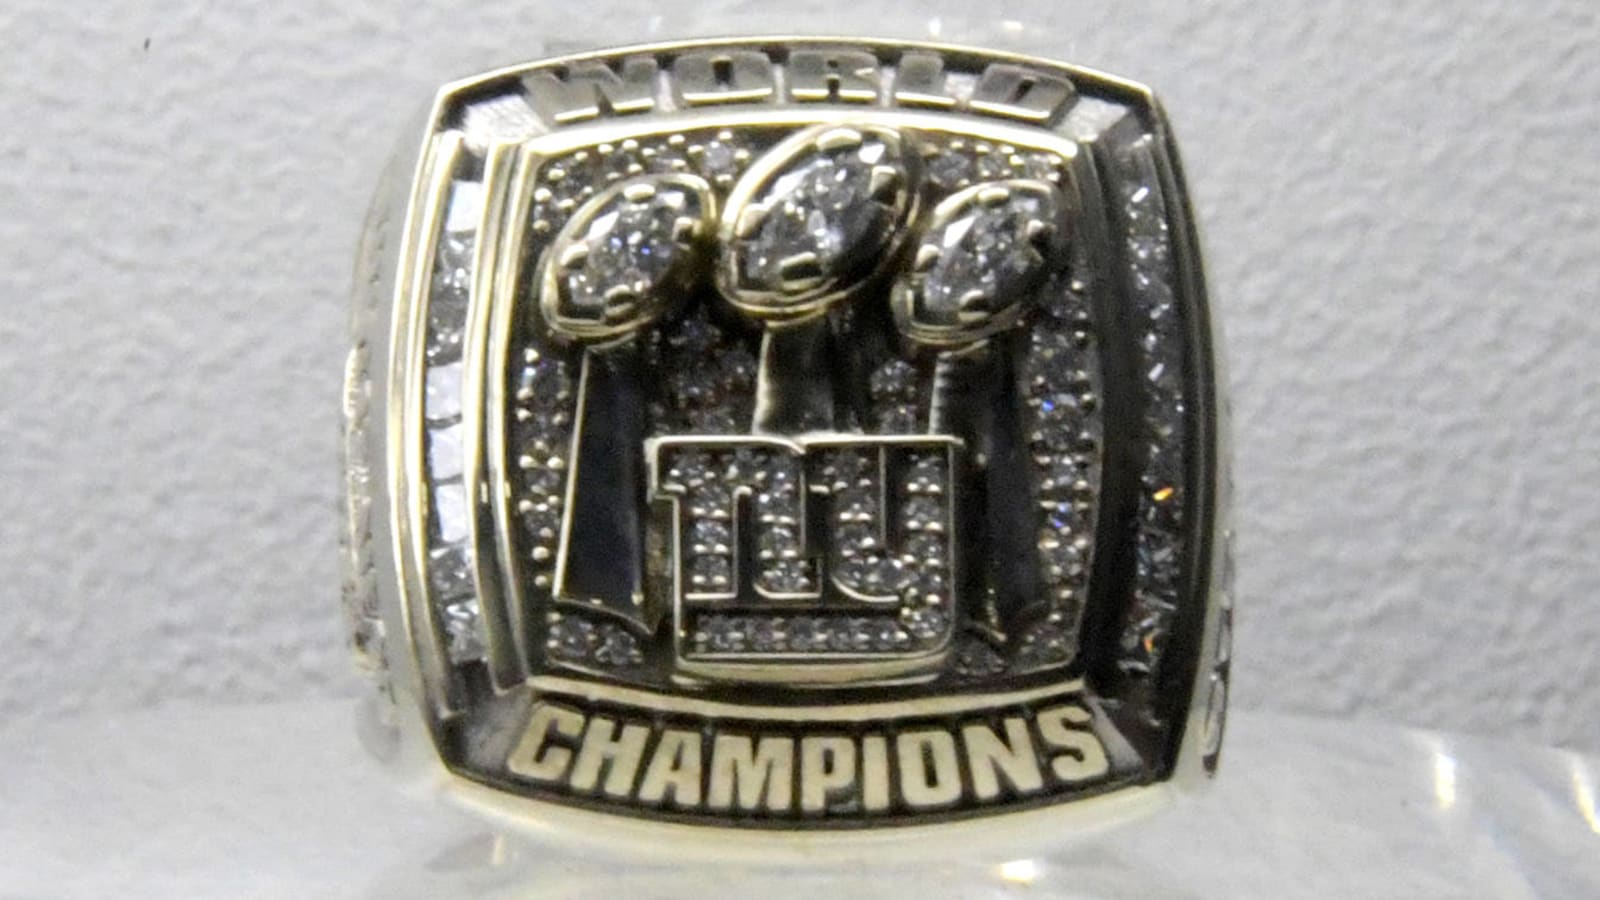 Pats fan stole Giants' SB XLII rings because they 'didn't deserve them'